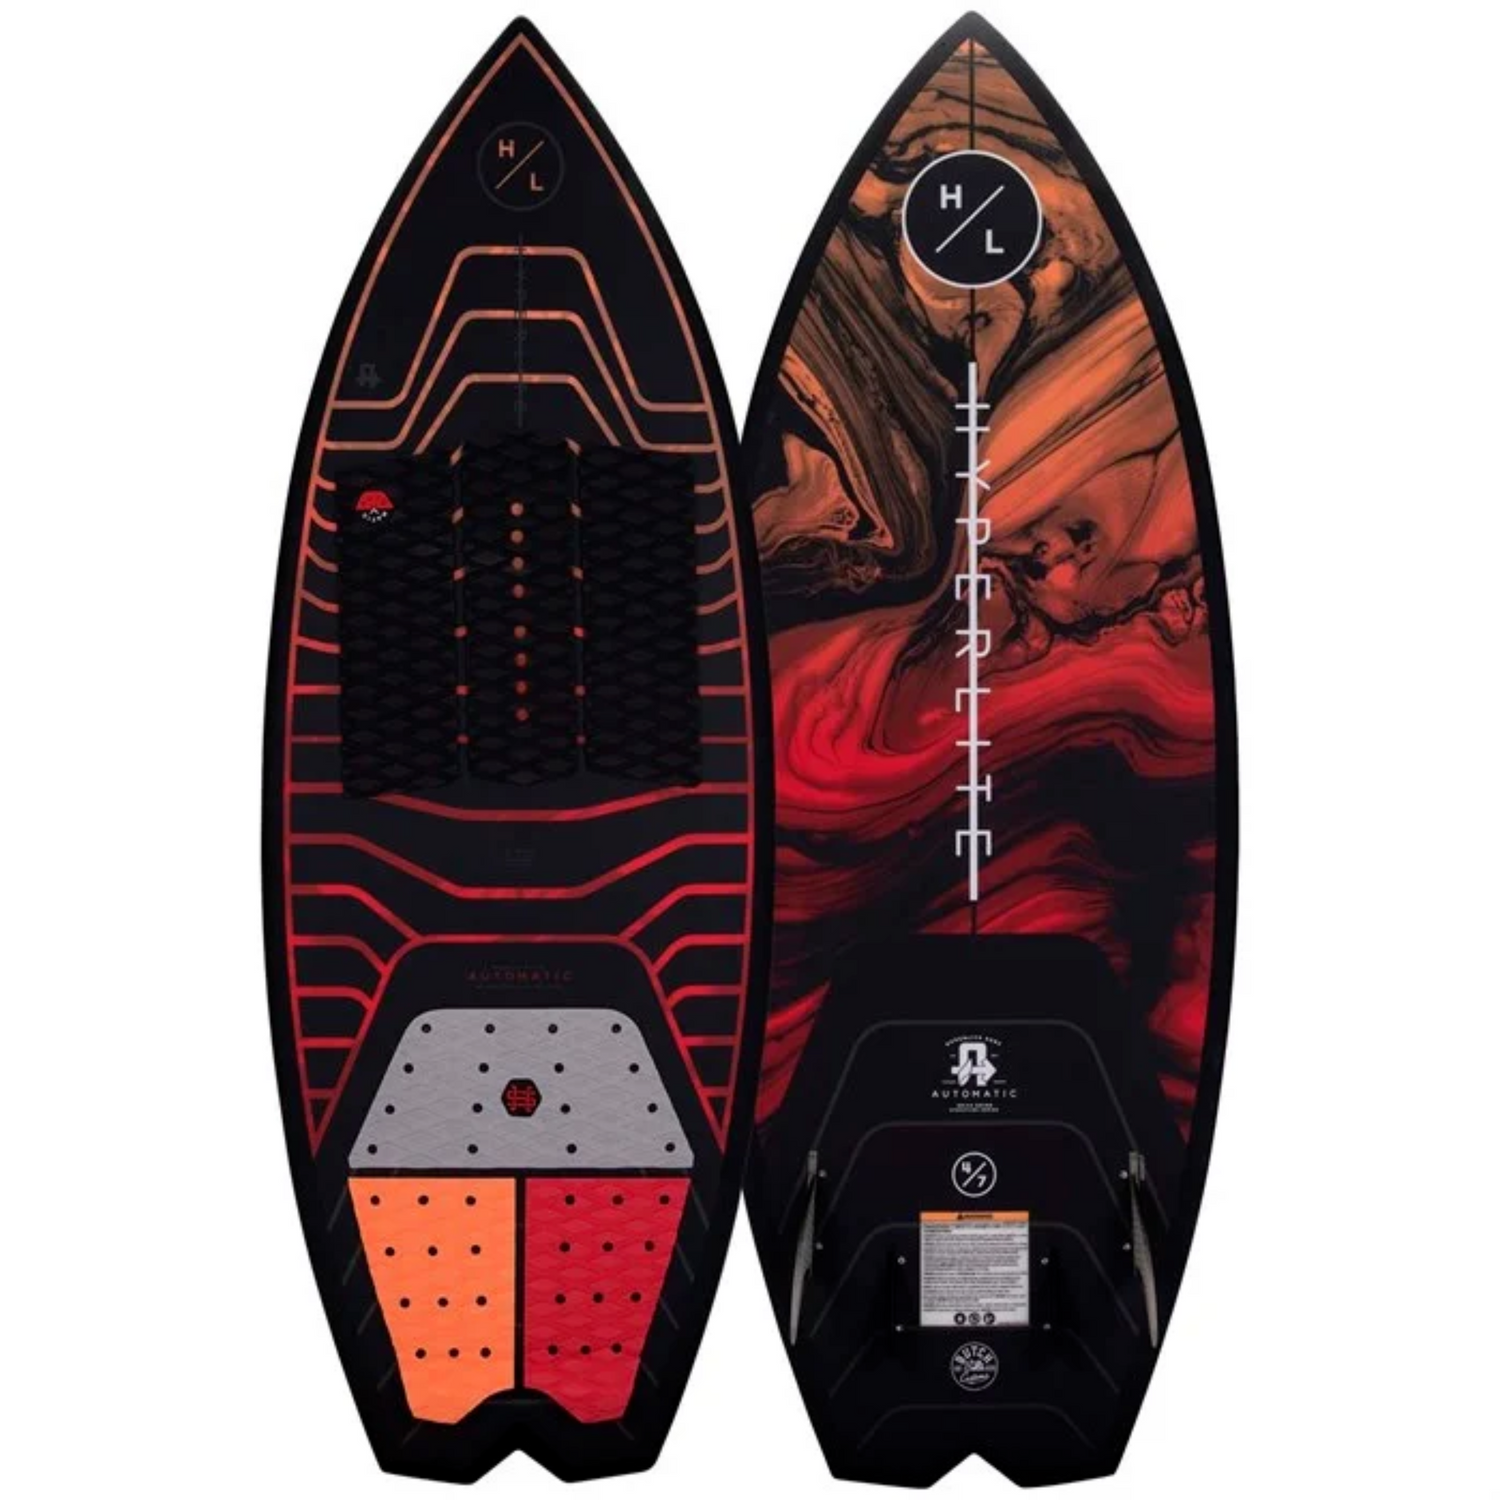 Top (left) and bottom (right) view of the hyperlite Automatic Wake Surfboard